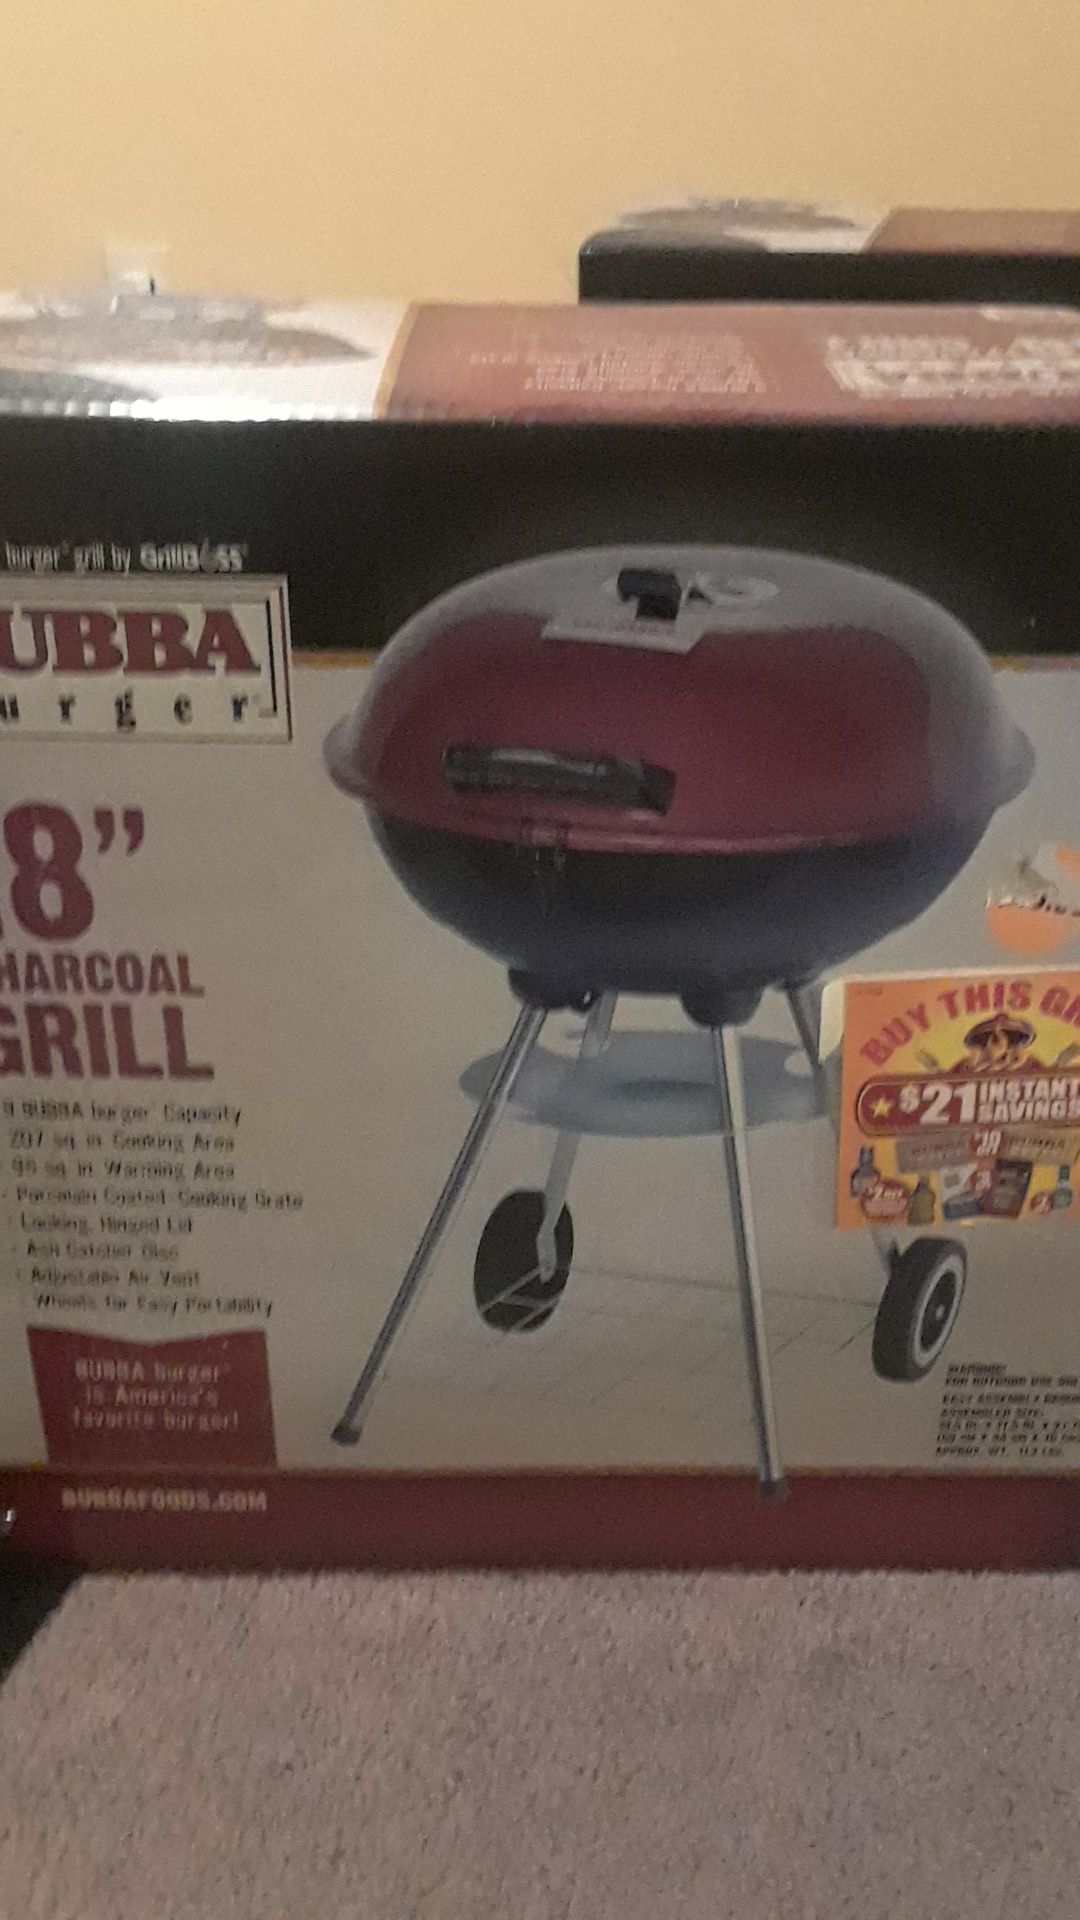 Bubba burger charcoal grill for Sale in Chicopee, MA - OfferUp